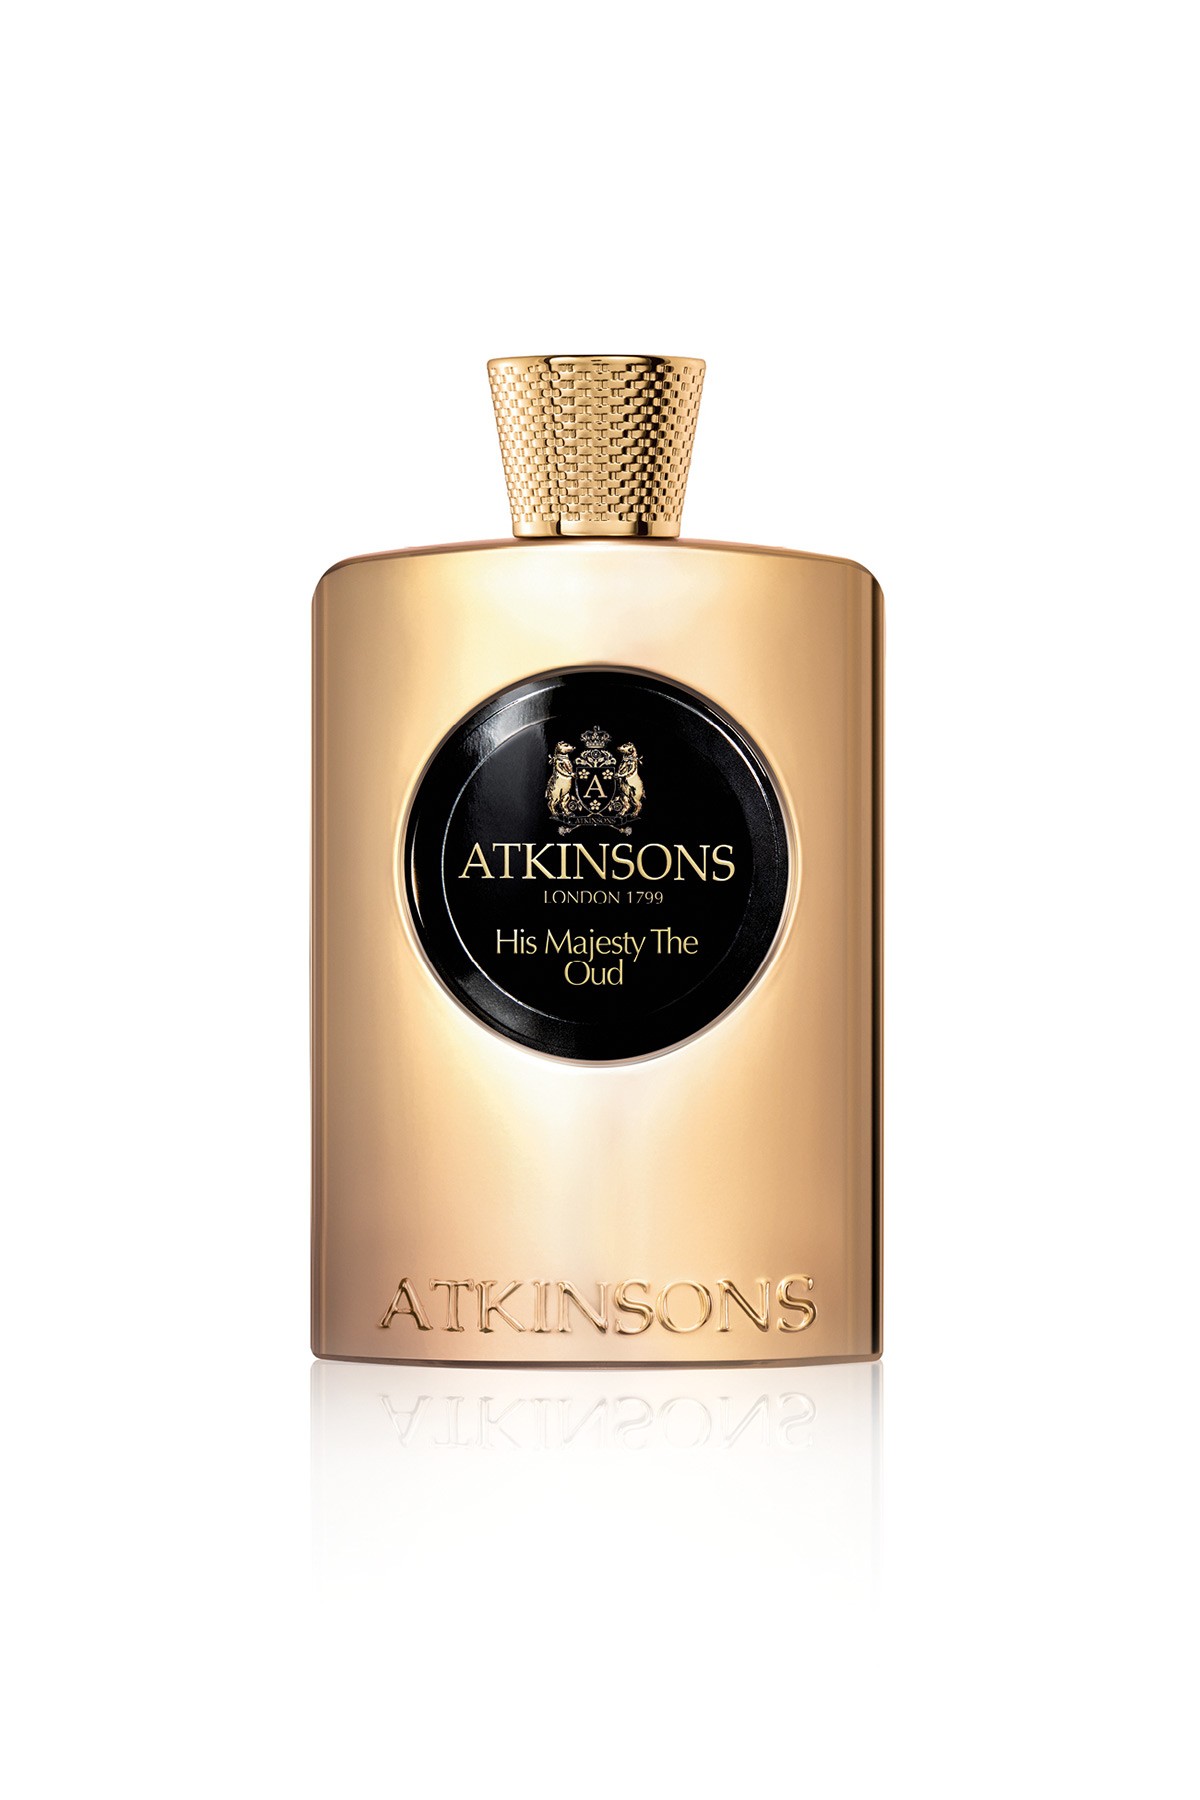 ATKINSONS HIS MAJESTY THE OUD EDP 100 ML image